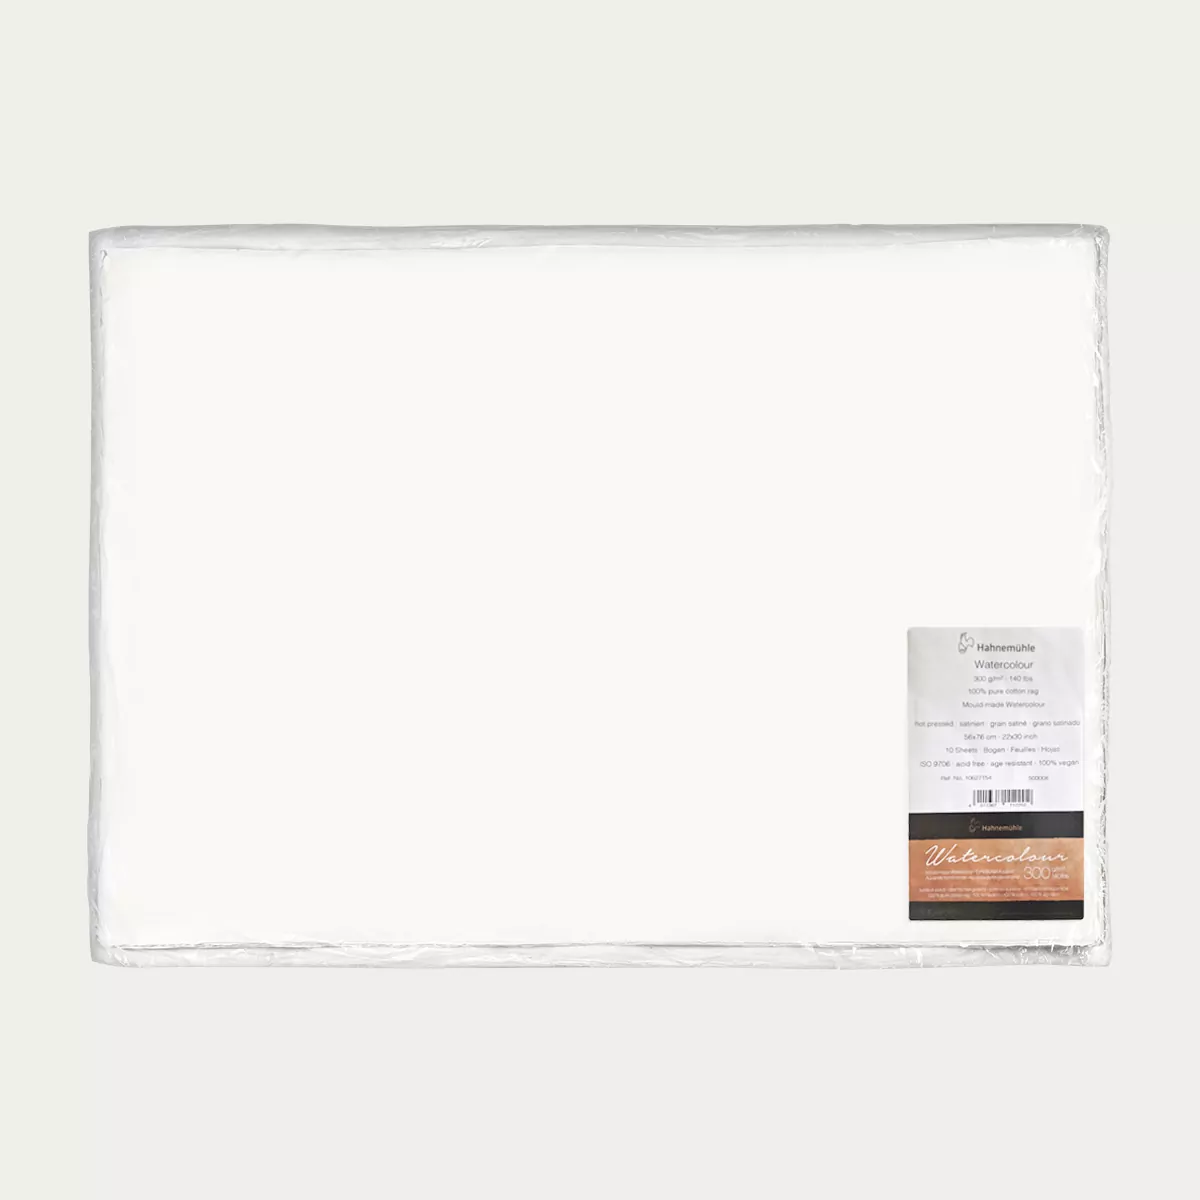 Hahnemühle Watercolor hot pressed 56x76cm 300gsm (10 Sheets)